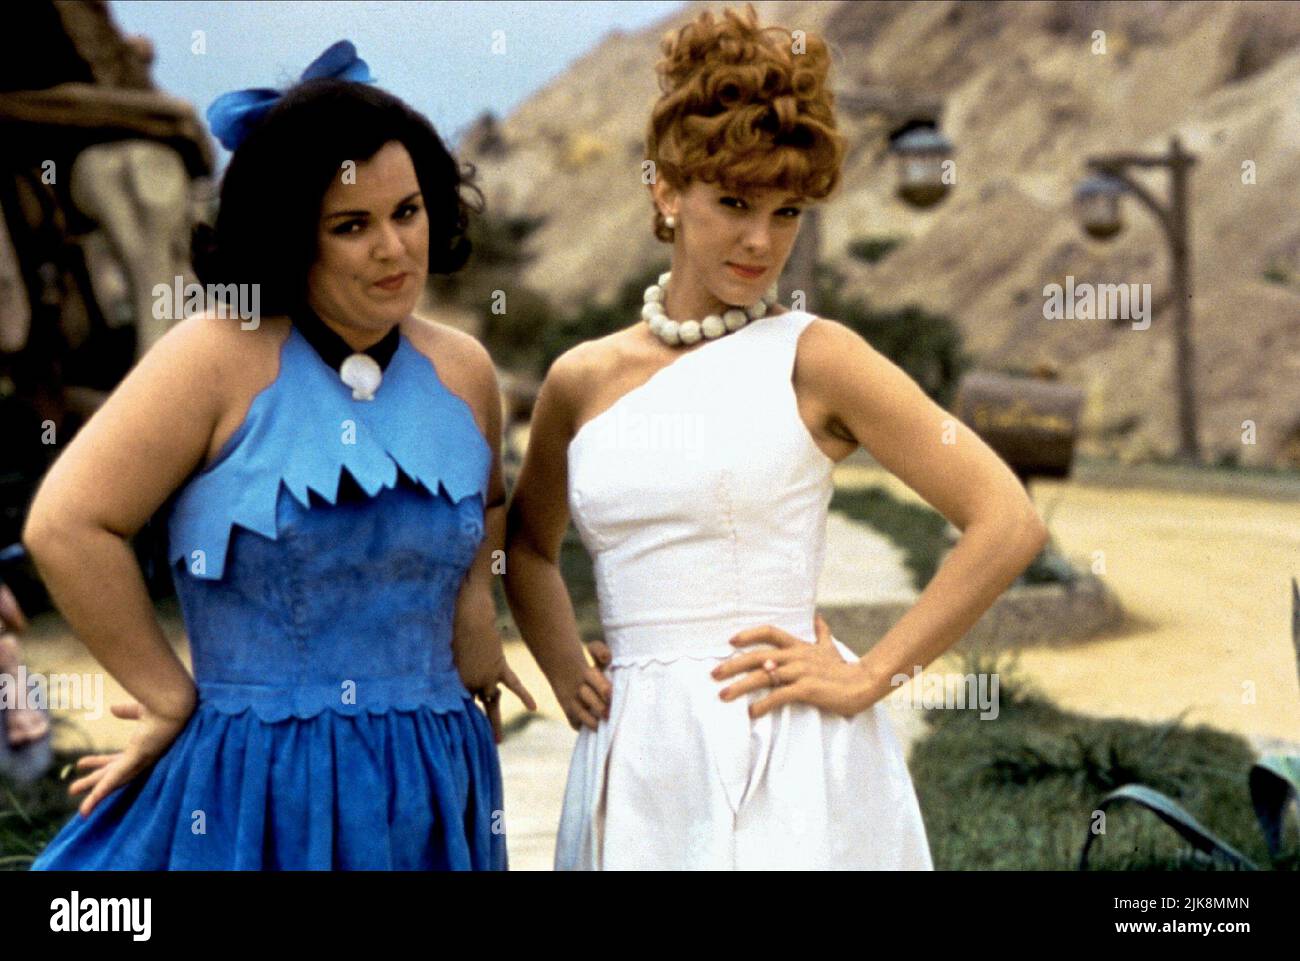 rosie-odonnell-elizabeth-perkins-film-the-flintstones-usa-1994-characters-betty-rubble-wilma-flintstone-director-brian-levant-23-may-1994-warning-this-photograph-is-for-editorial-use-only-and-is-the-copyright-of-hanna-barberauniversal-andor-the-photographer-assigned-by-the-film-or-production-company-and-can-only-be-reproduced-by-publications-in-conjunction-with-the-promotion-of-the-above-film-a-mandatory-credit-to-hanna-barberauniversal-is-required-the-photographer-should-also-be-credited-when-known-no-commercial-use-can-be-granted-without-written-authority-from-the-film-2JK8MMN.jpg